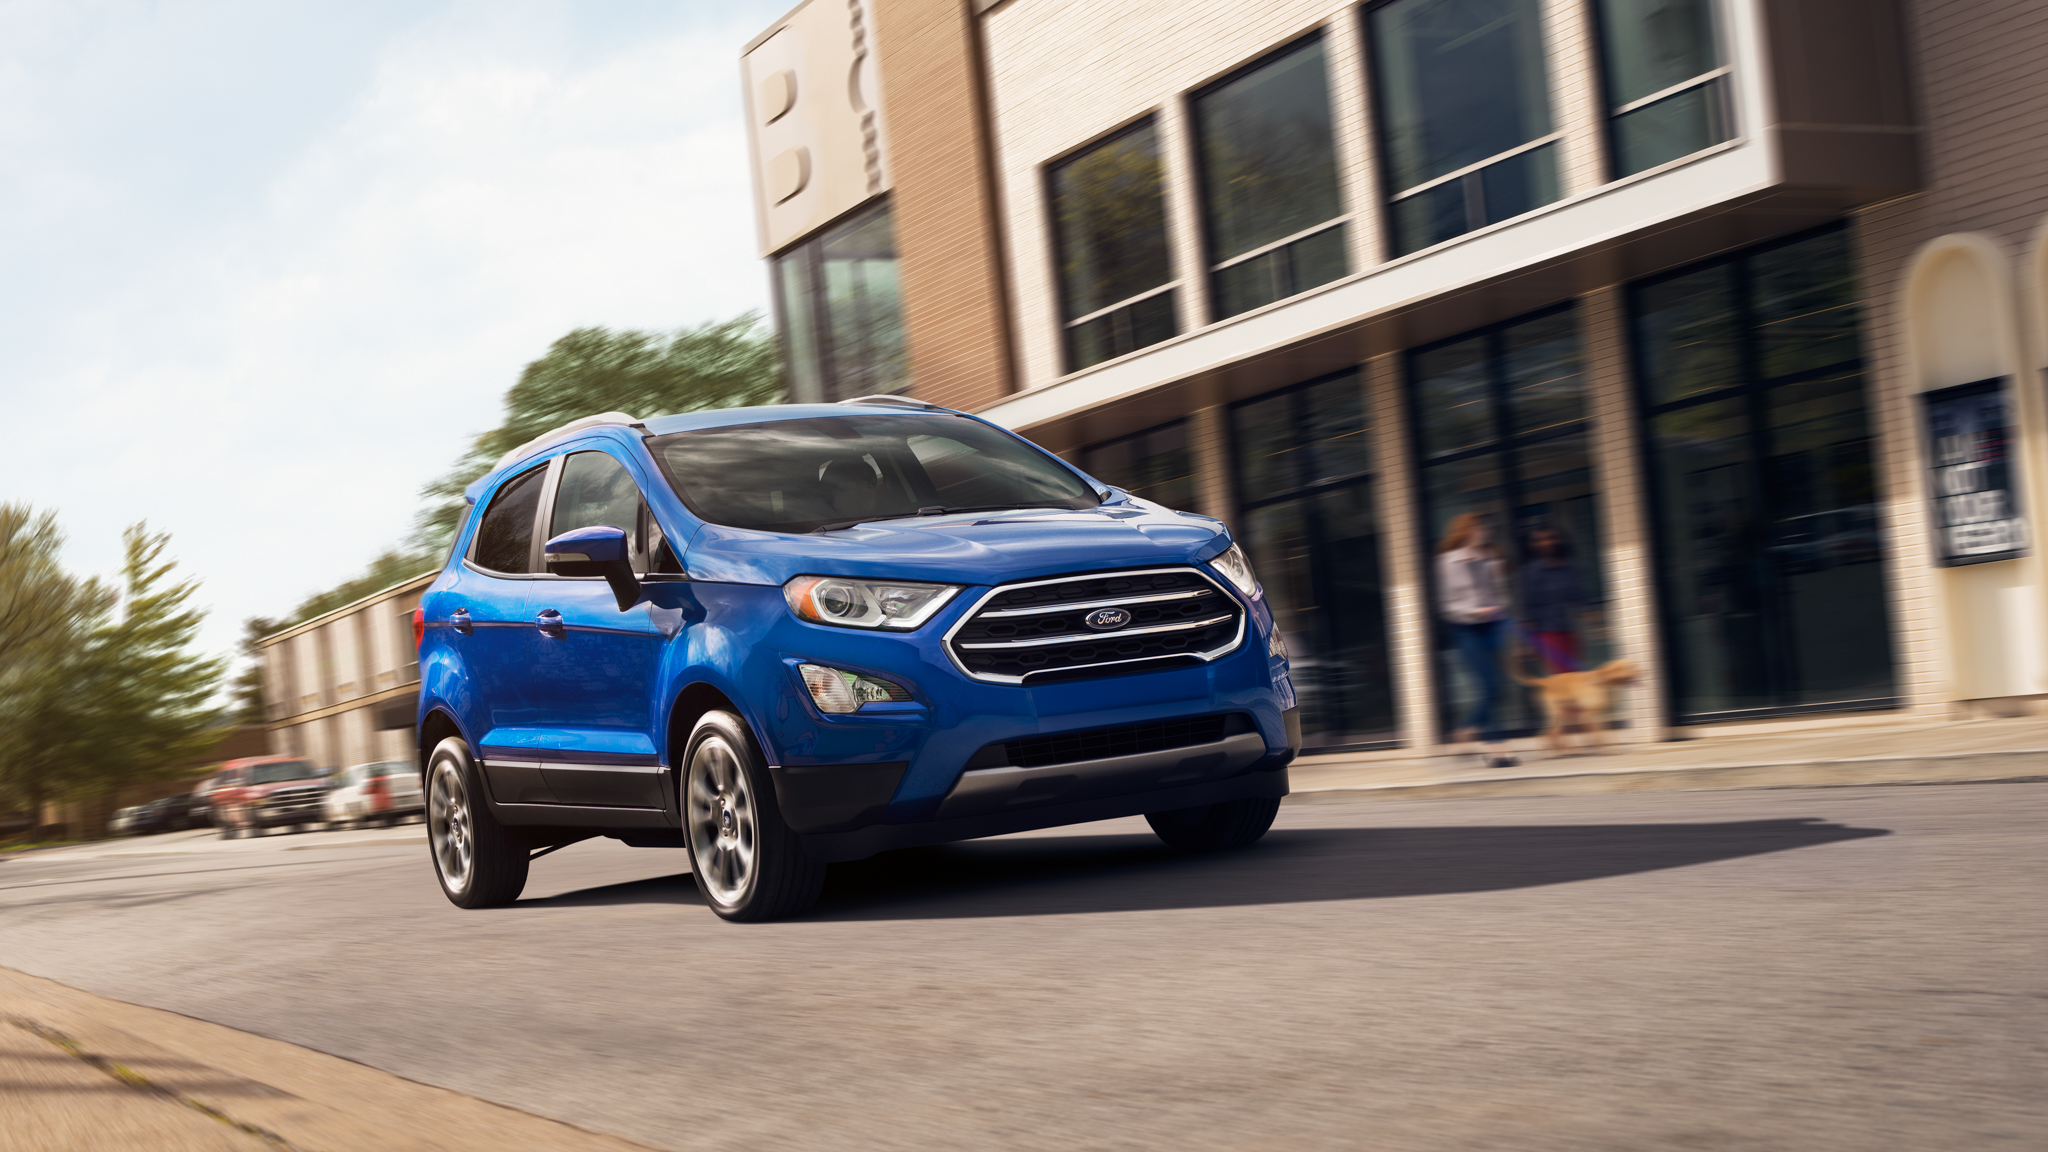 Ford, last year's most recalled car brand, issues its second major